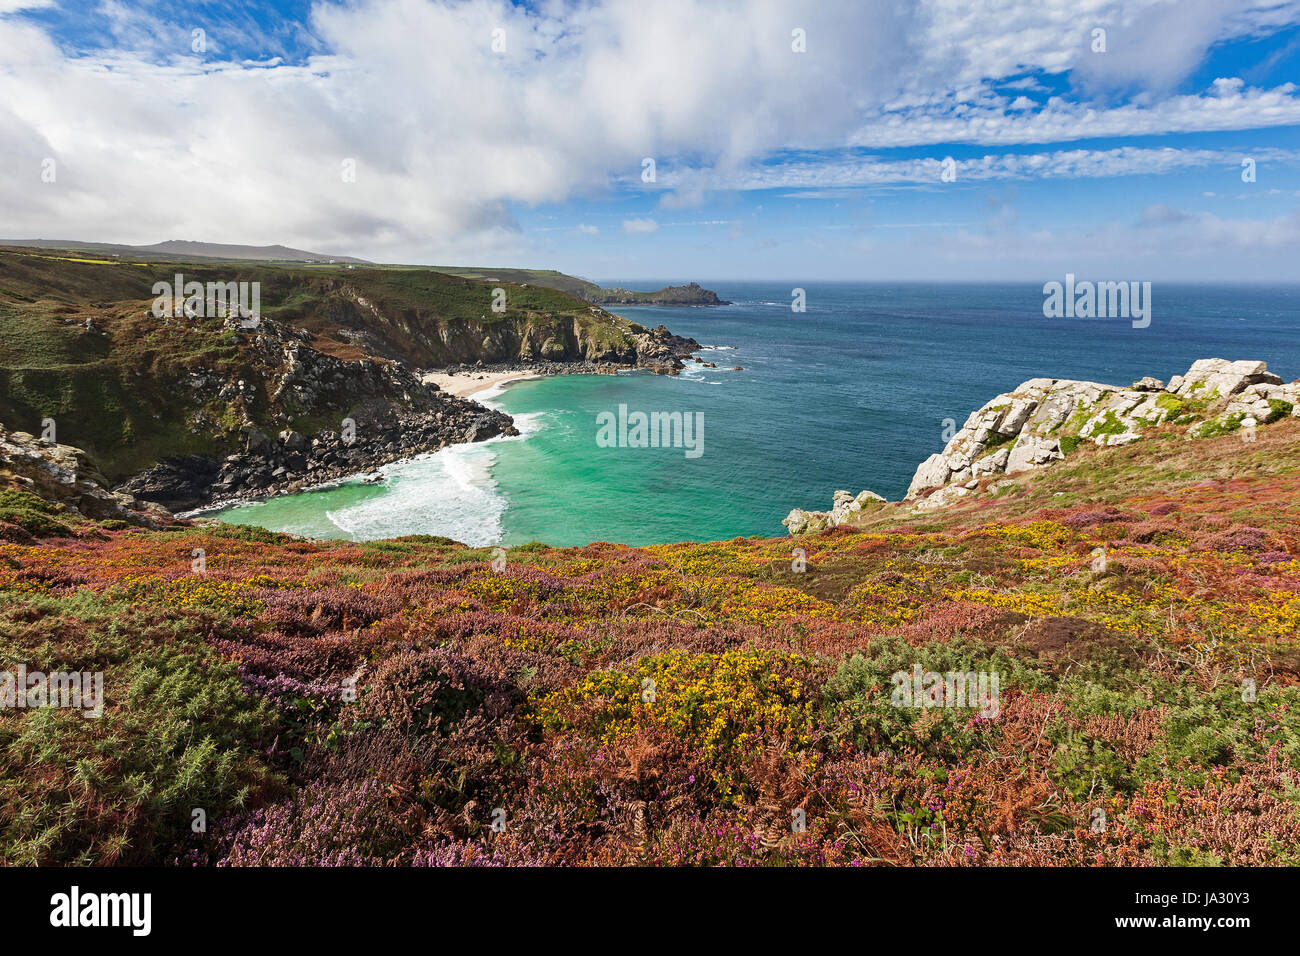 Colourful wild flowers on top of a cliff in Cornwall, England, UK. Stock Photo